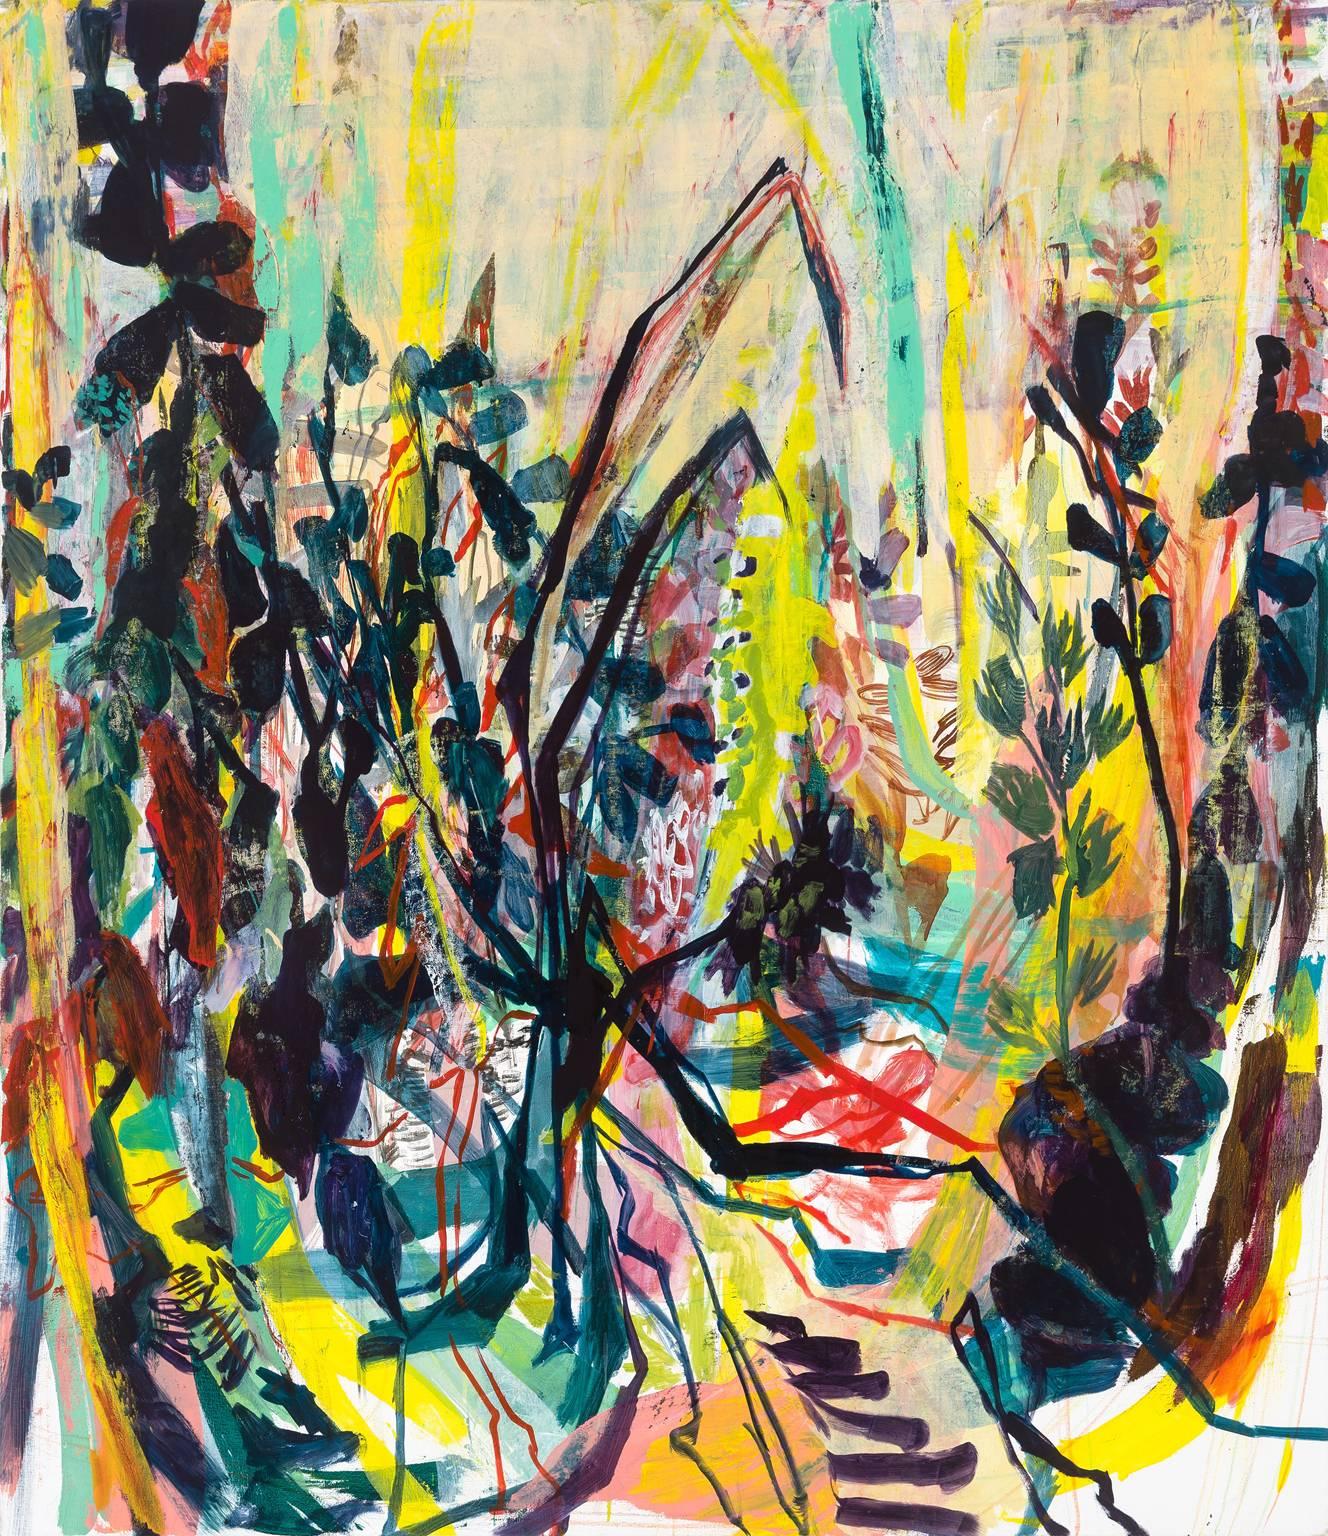 Allison Gildersleeve's work addresses the vibration between clarity and abstraction and the known and unknown. Drawing from landscapes and dense scenes of nature, her high chroma paintings flirt with a recognizable sense of space, echoing formal